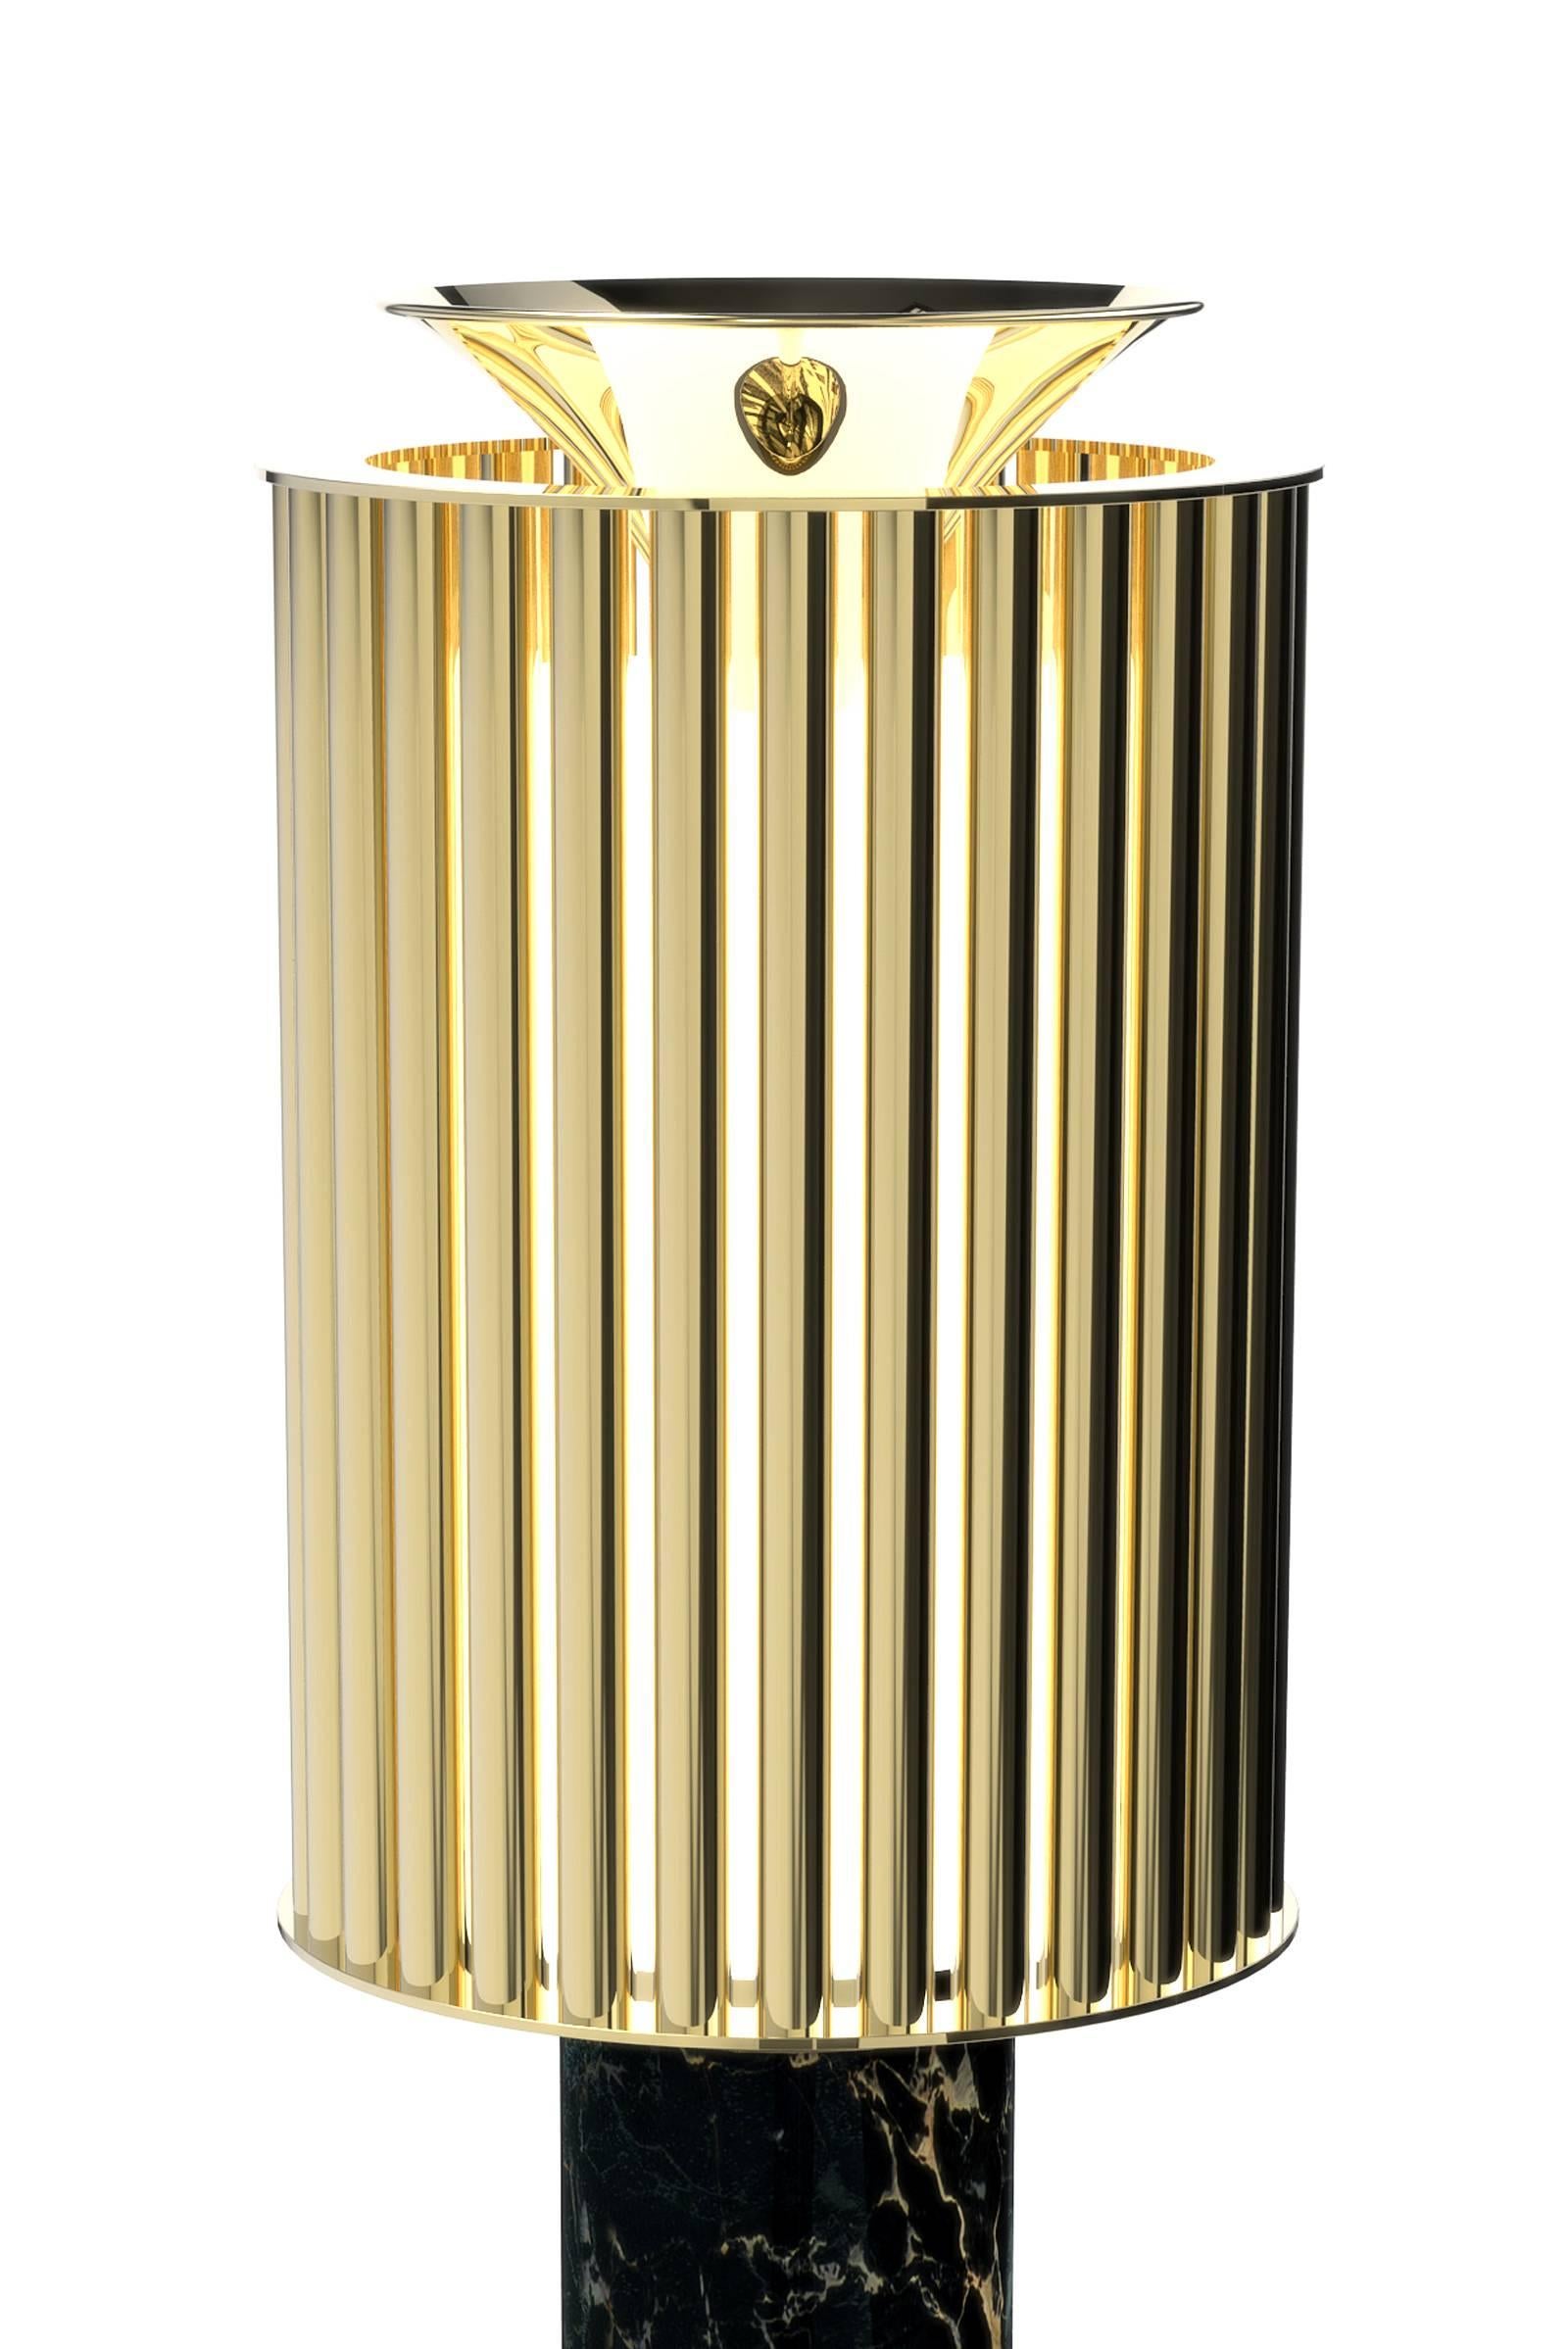 Table lamp excellence with Estremoz marble and
gold-plated brass, straight brass tubes.
Six G9 bulbs included.
